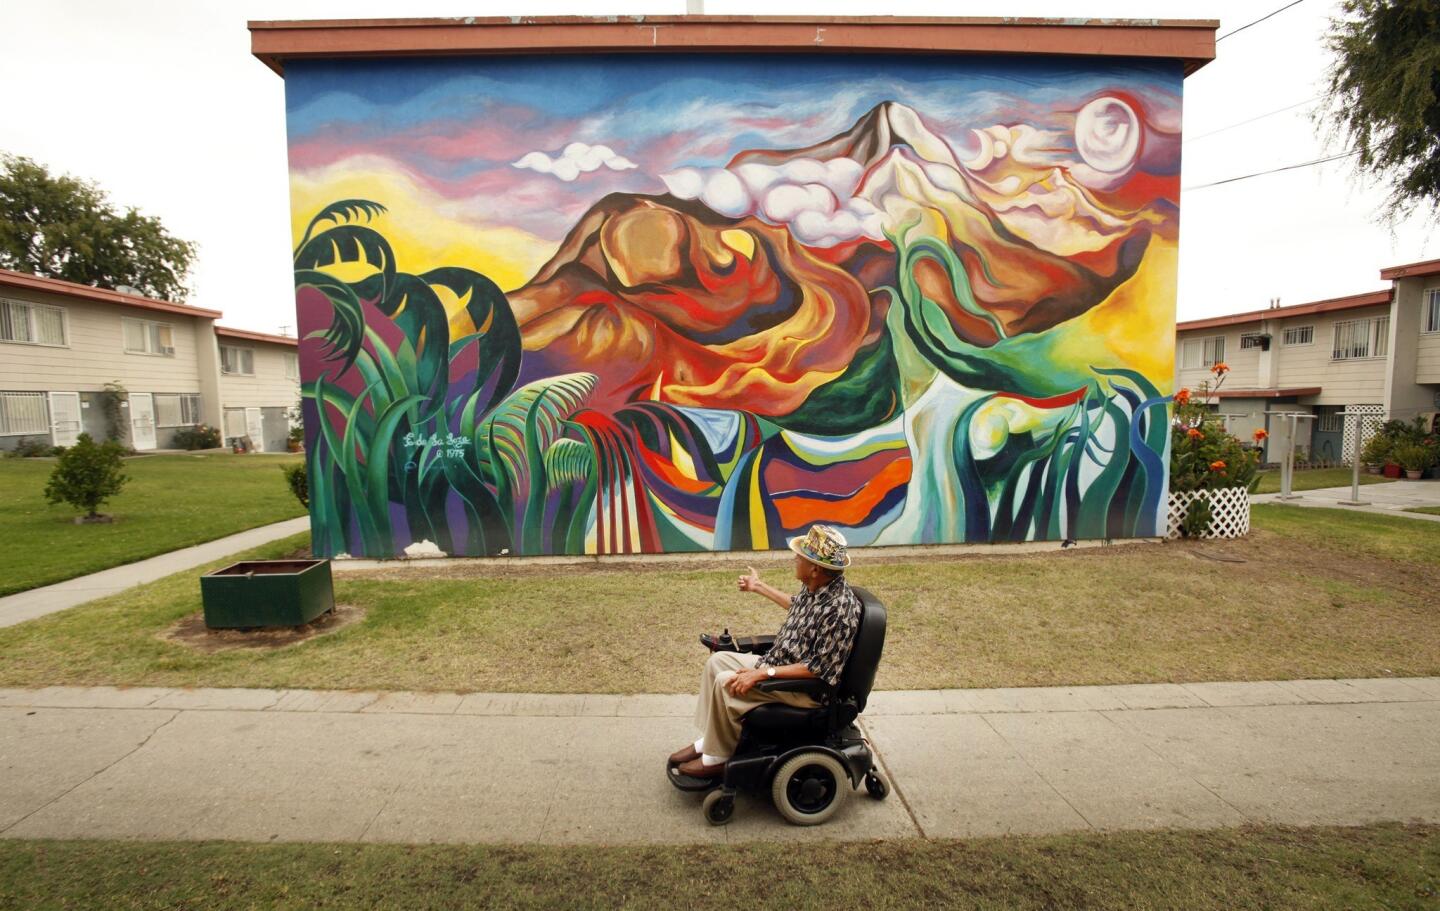 Oscar Eagle, 70, visits some of the murals he helped organize in 1973 that decorate the homes in Estrada Courts, located at Olympic Boulevard and Lorena Street in Boyle Heights.